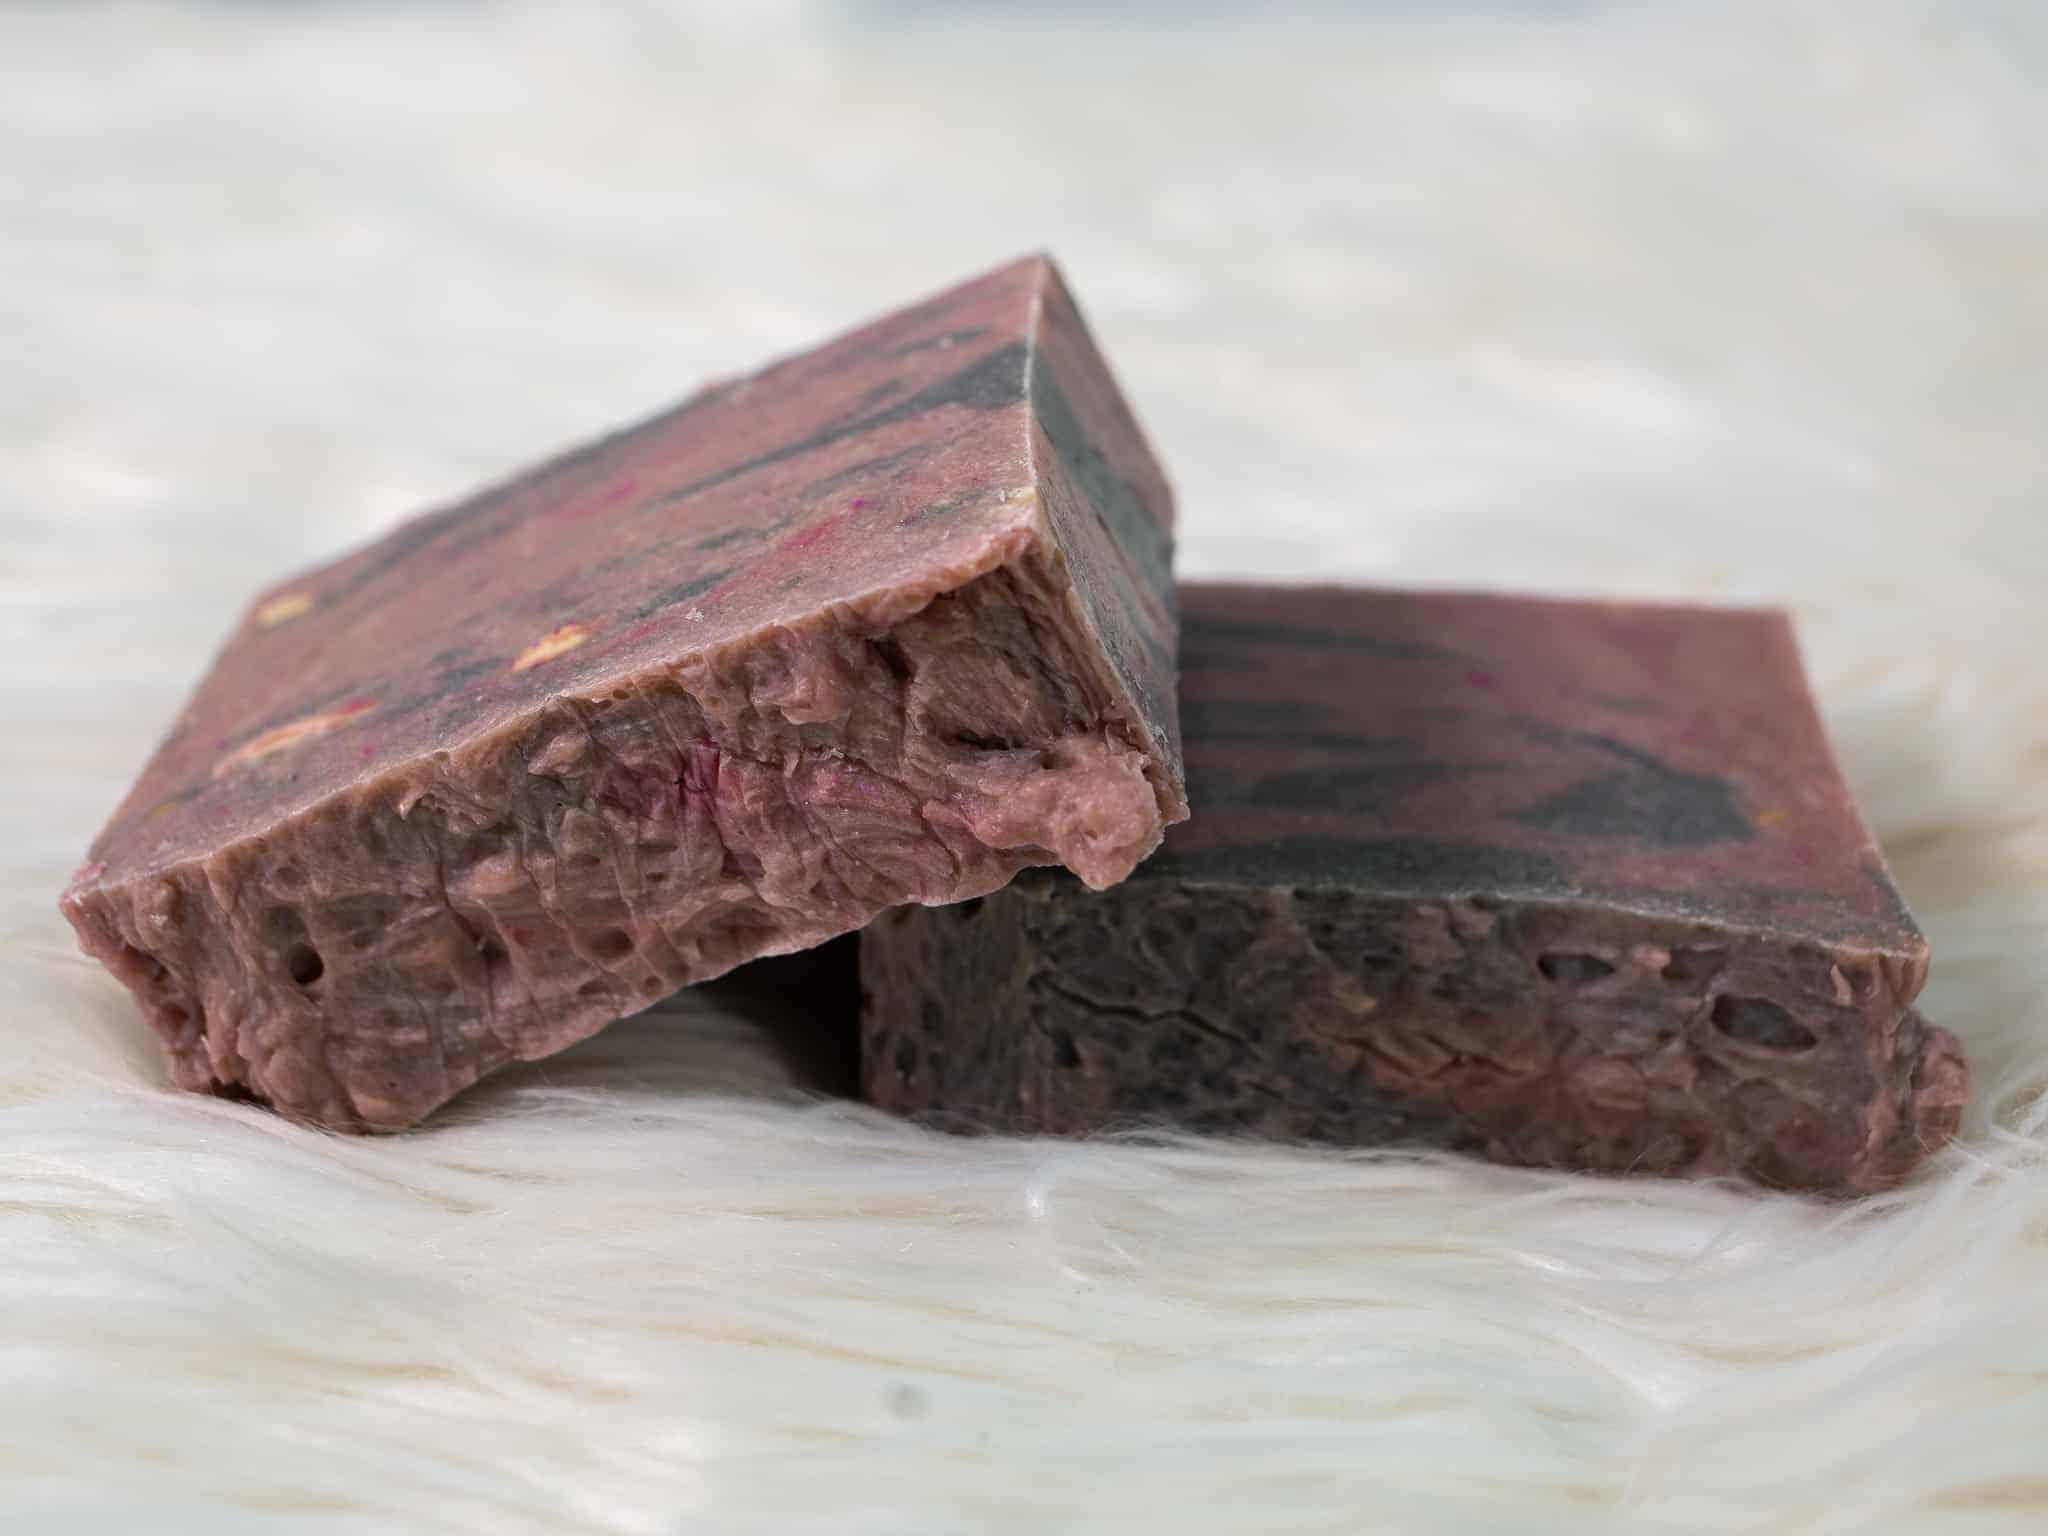 This Black Raspberry Vanilla Cold Process Body Bar is made with love by Sudzy Bums! Shop more unique gift ideas today with Spots Initiatives, the best way to support creators.